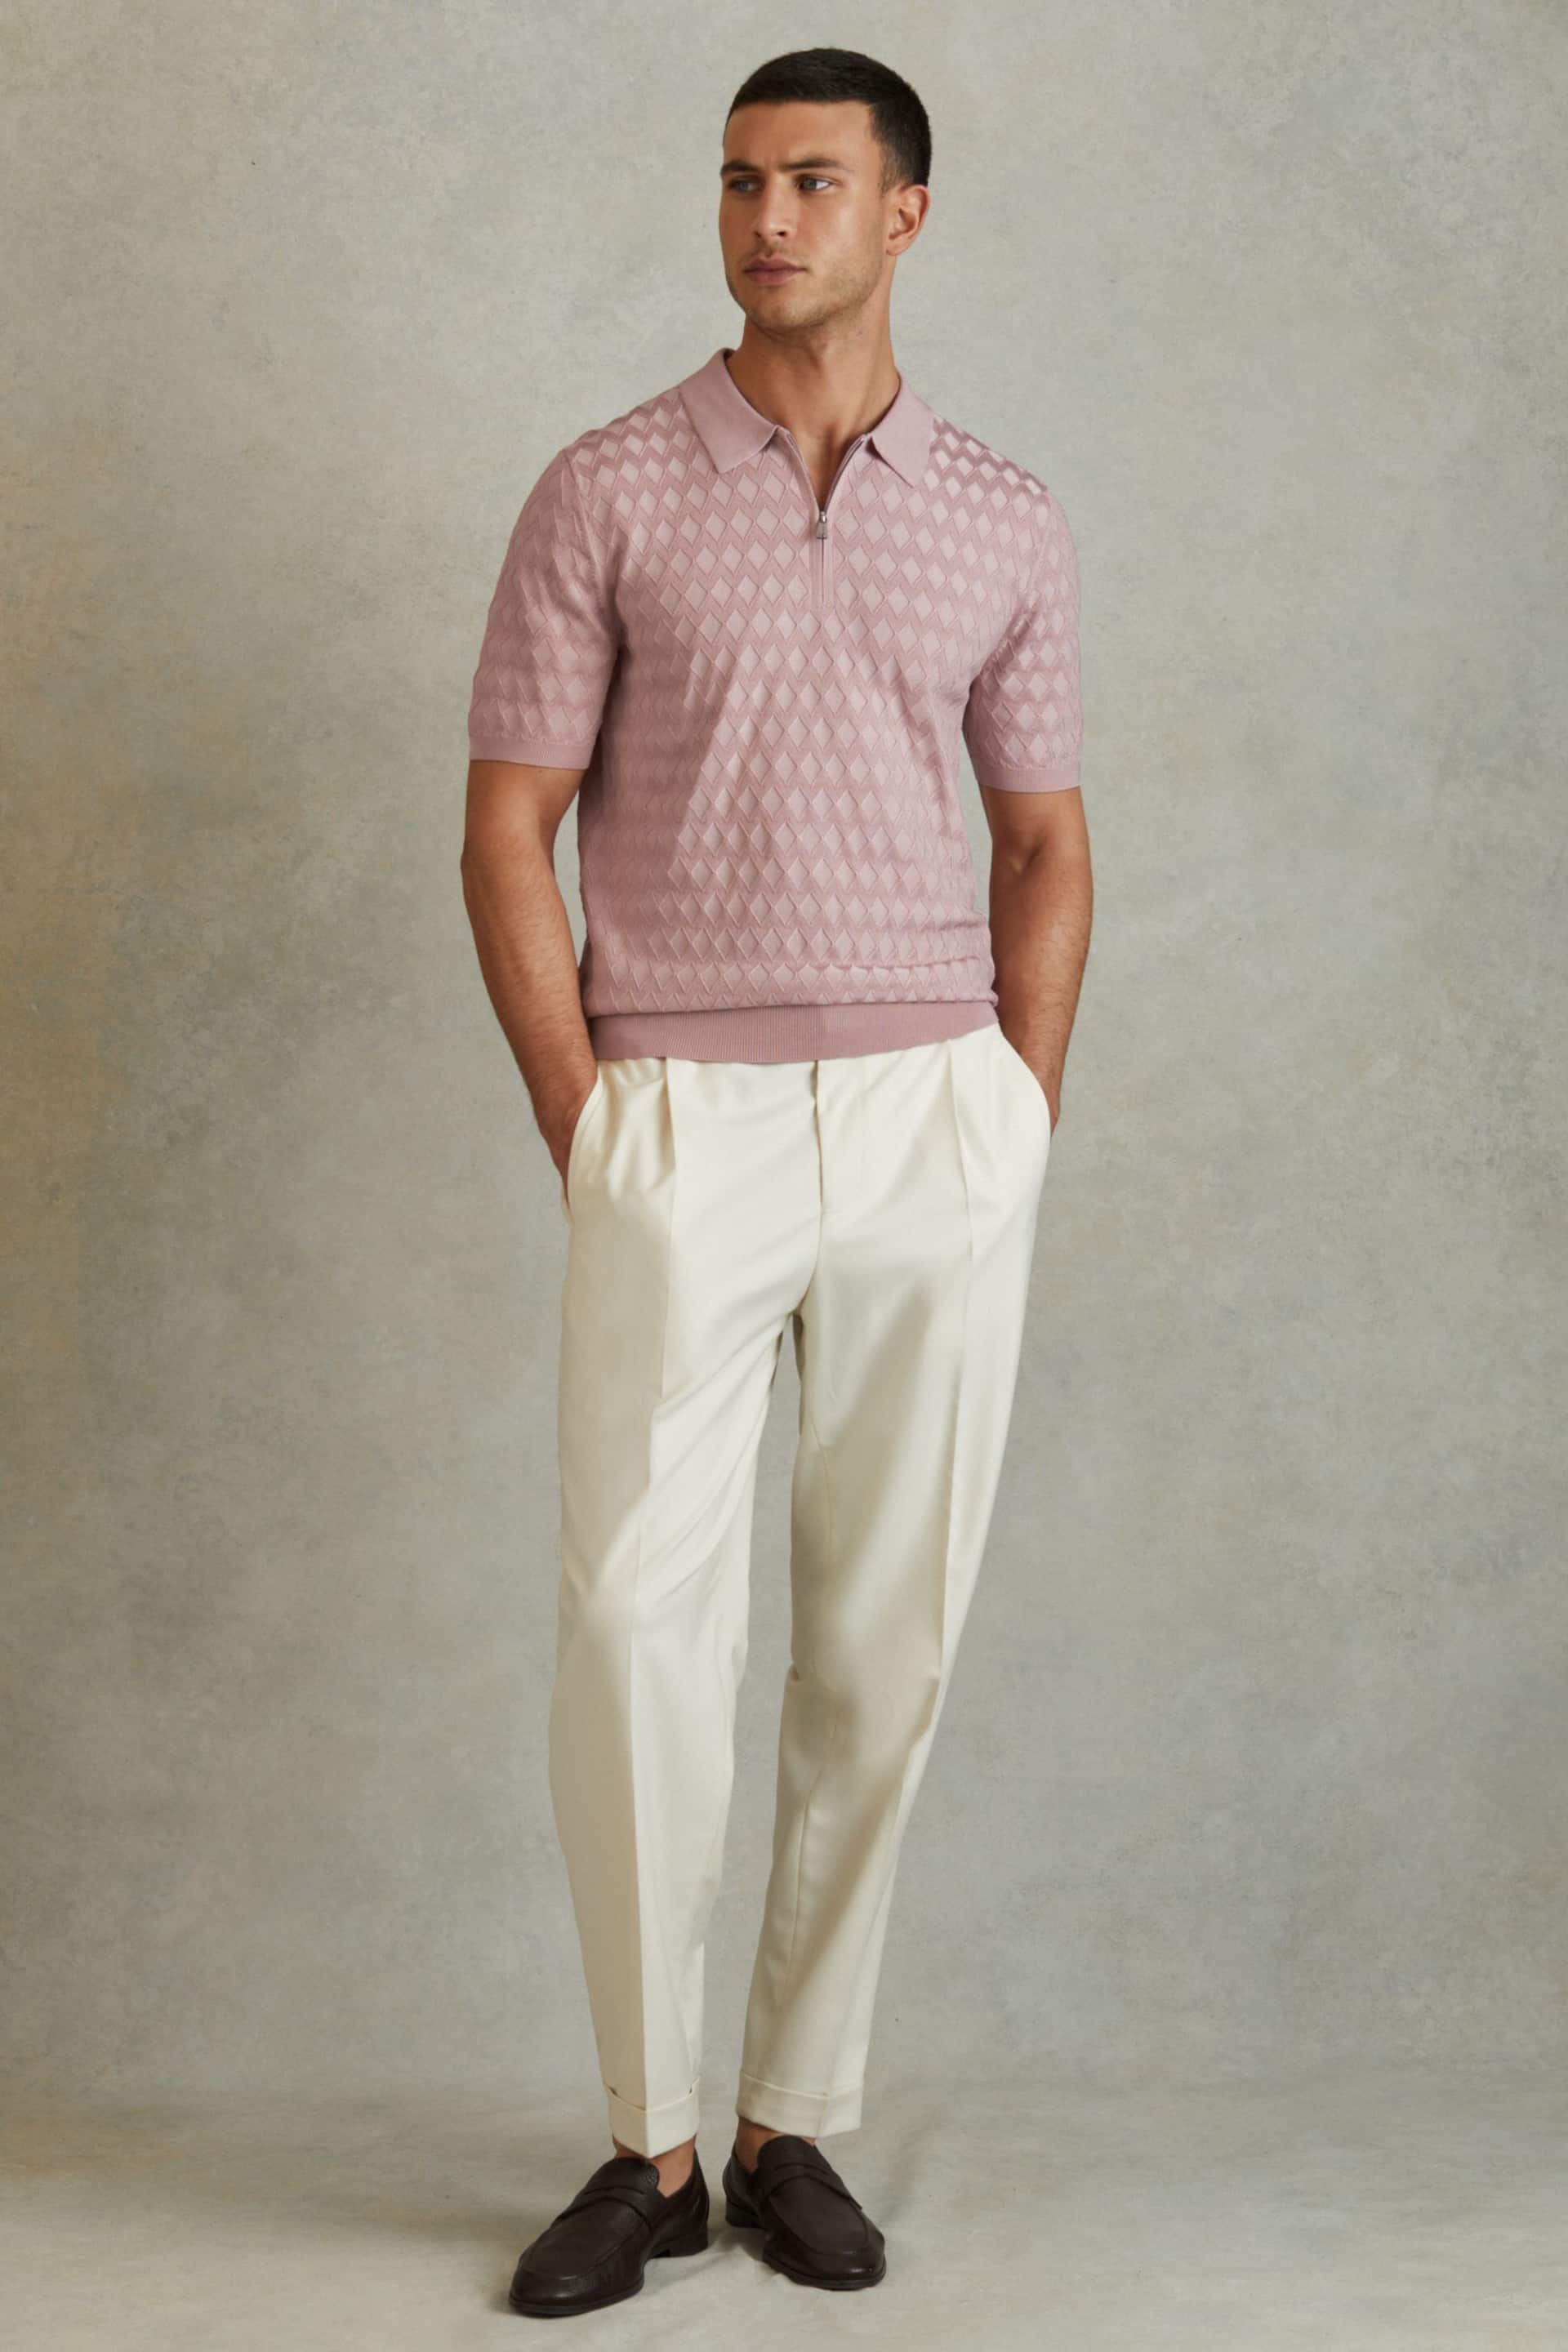 Reiss Soft Pink Rizzo Half-Zip Knitted Polo Shirt - Image 3 of 5